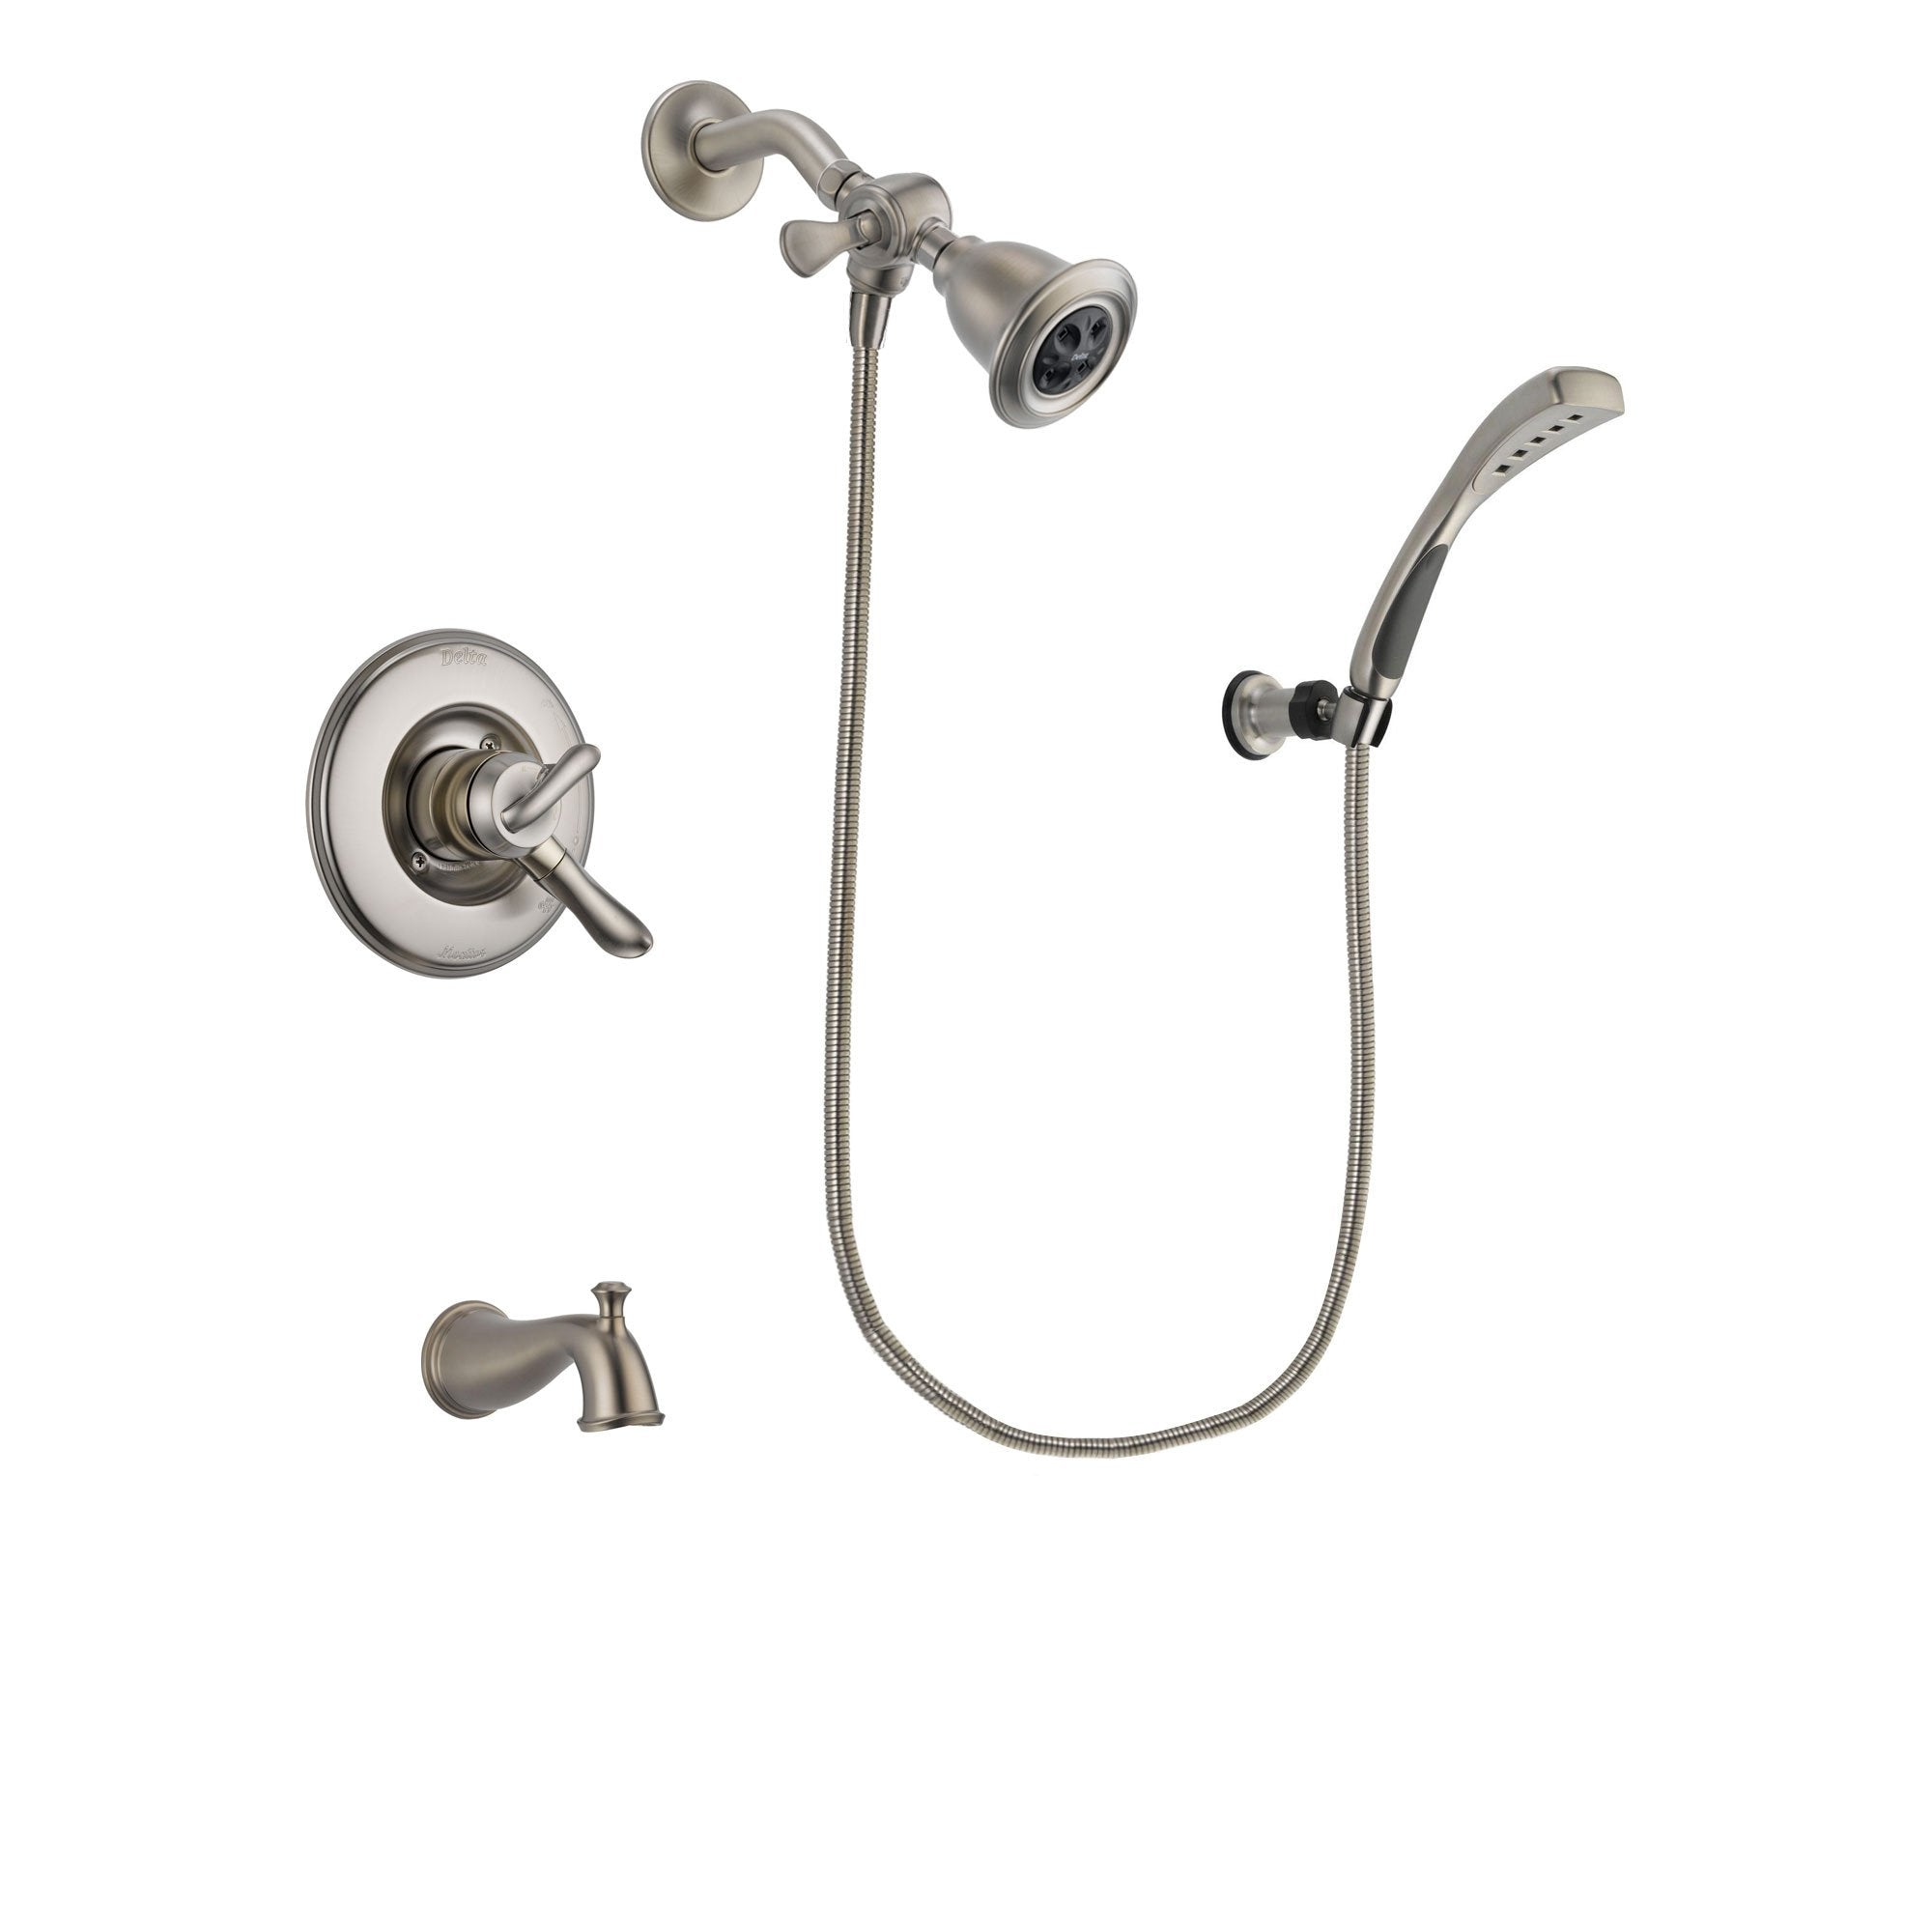 Delta Linden Stainless Steel Finish Dual Control Tub and Shower Faucet System Package with Water Efficient Showerhead and Wall Mounted Handshower Includes Rough-in Valve and Tub Spout DSP1849V